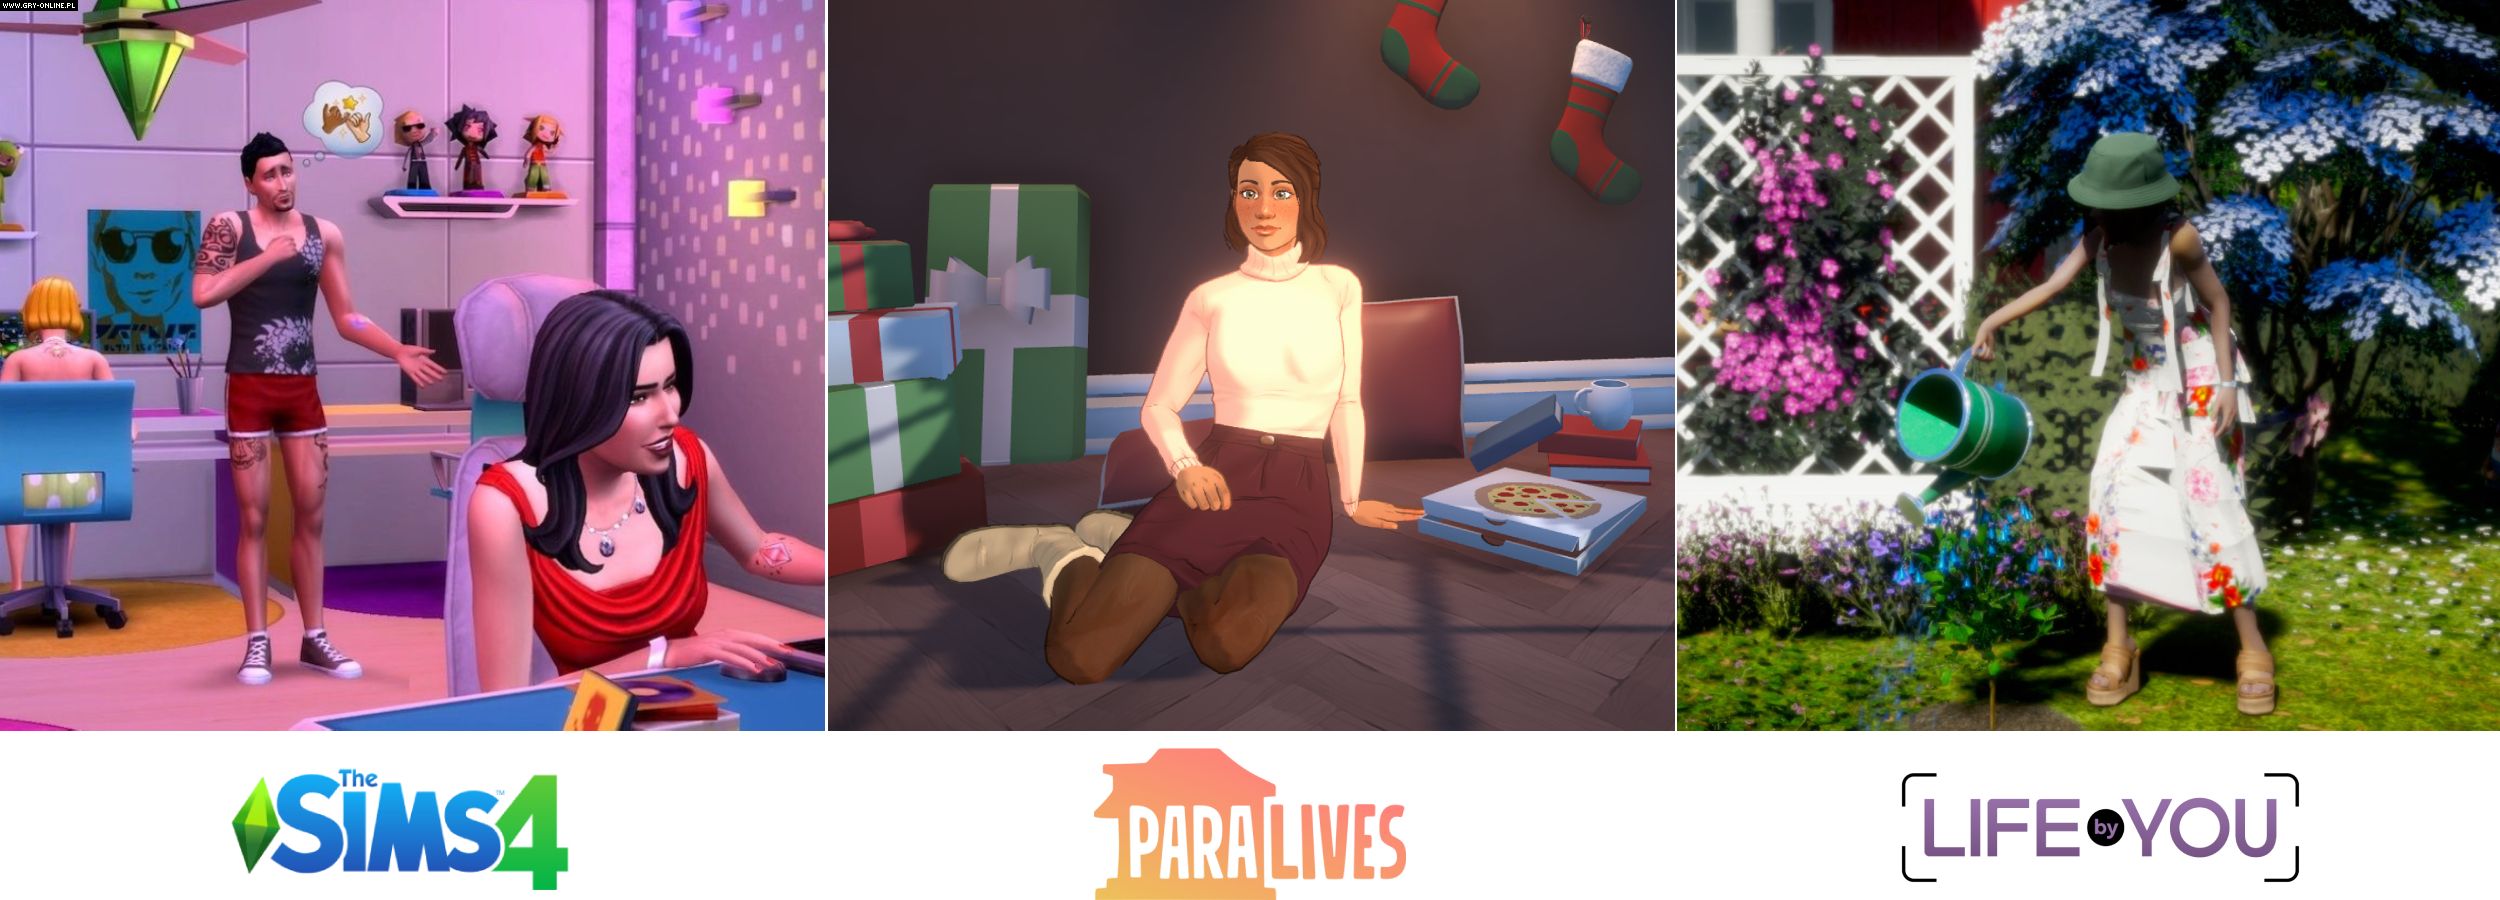 The Sims 4 vs Paralives vs Life by You - Similar, Yet Different